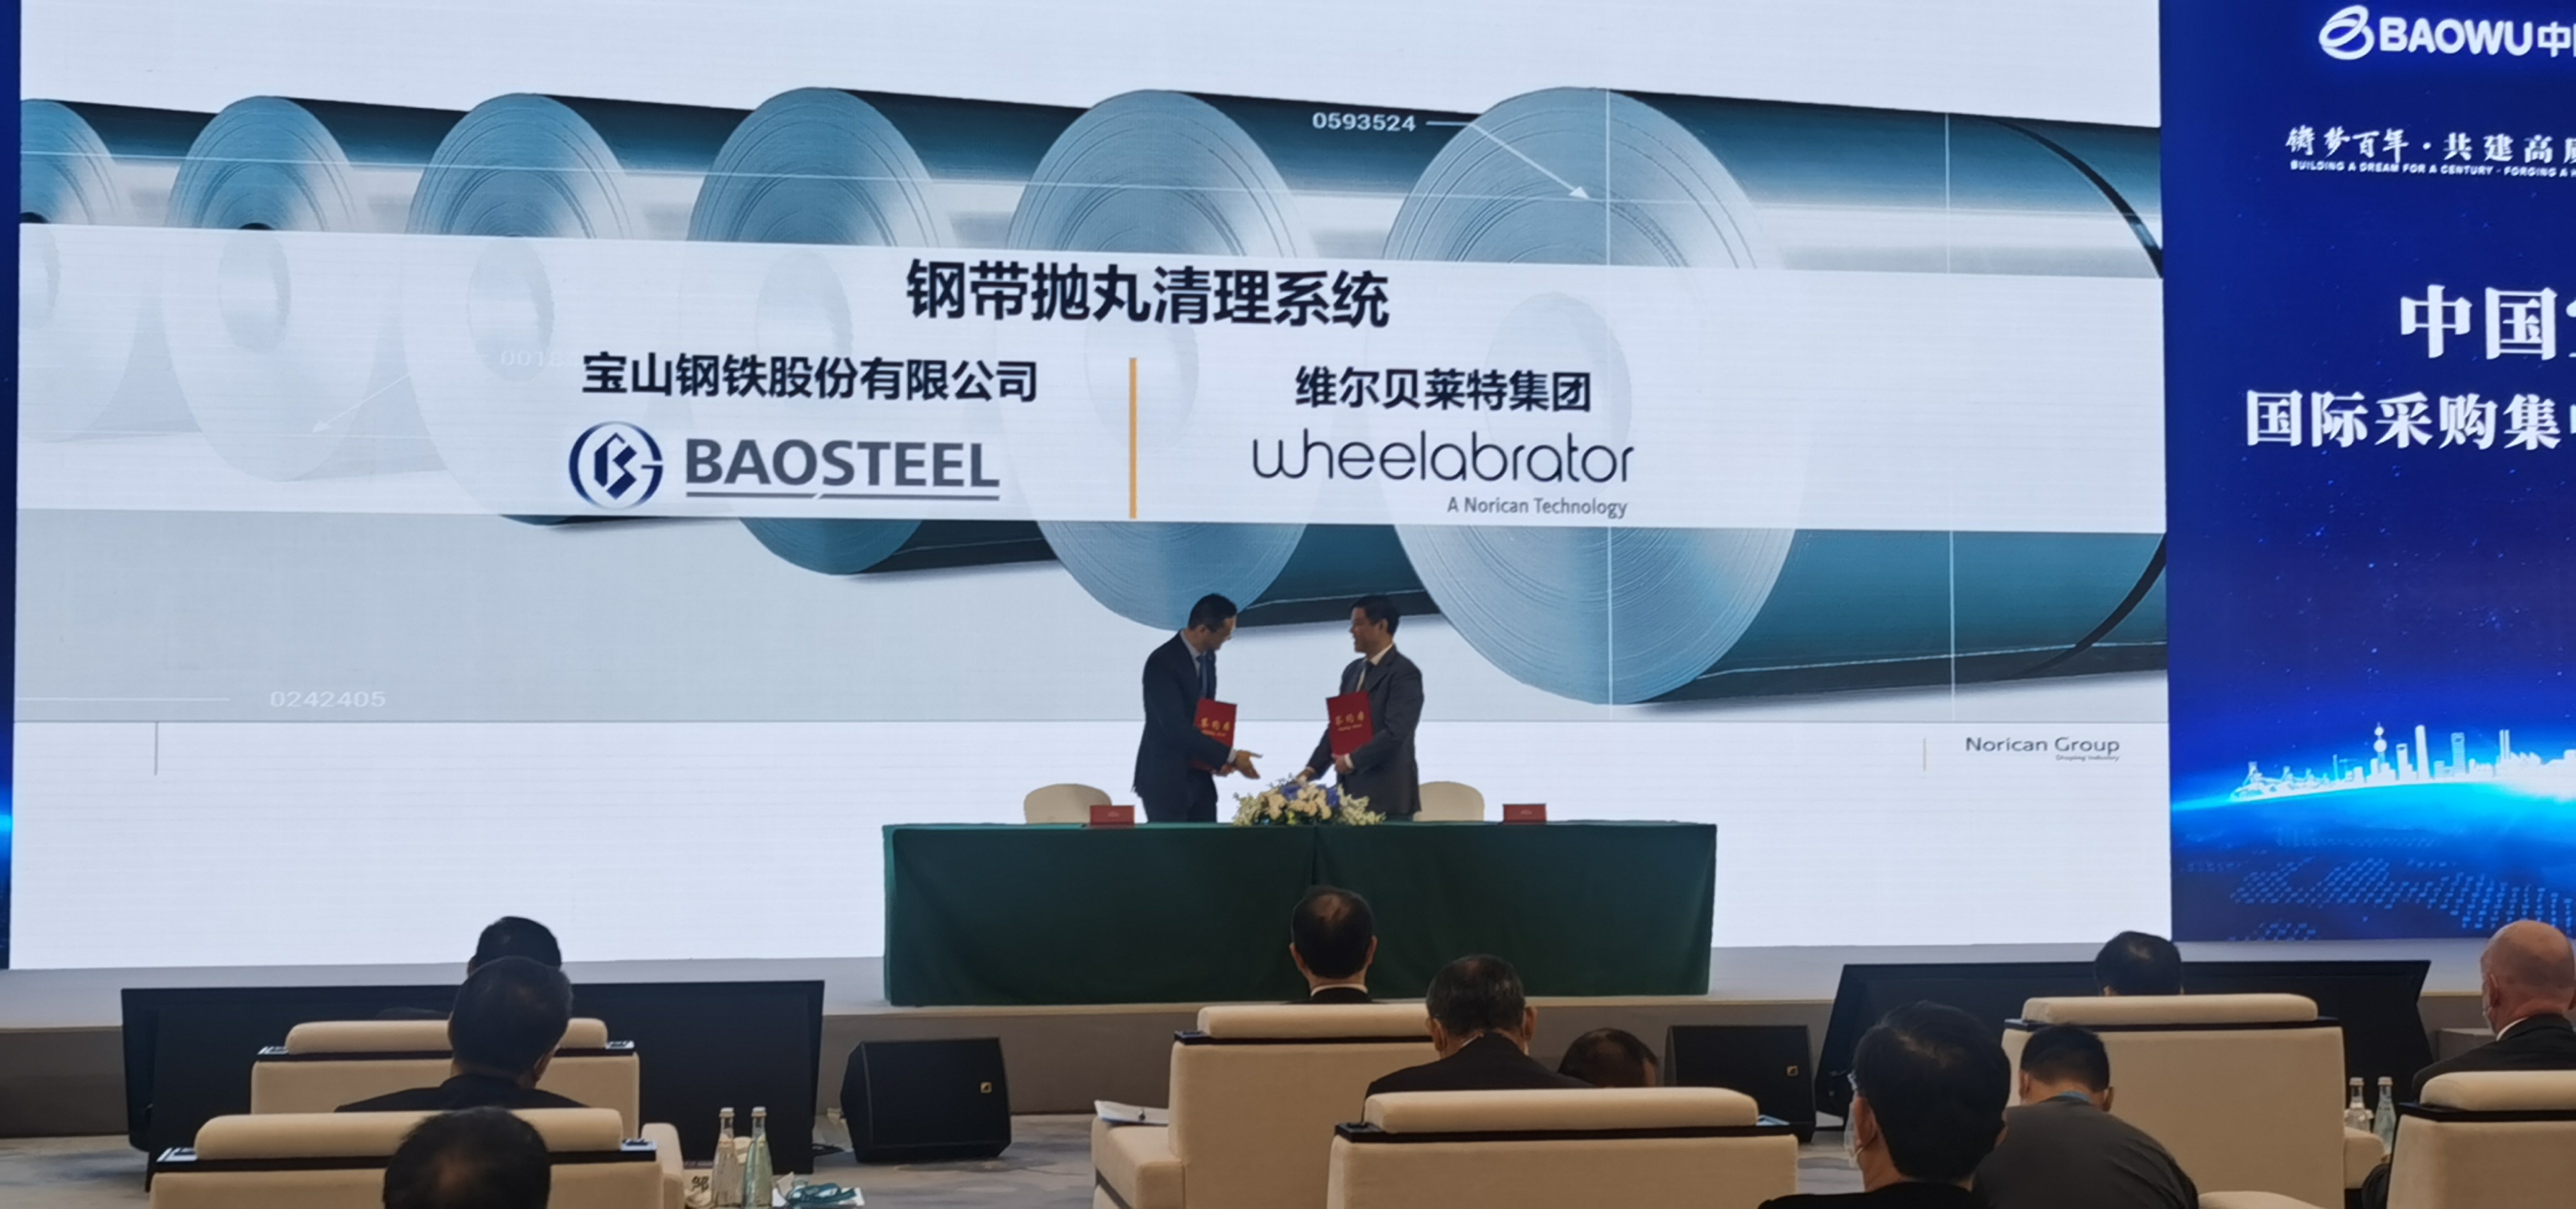 Baosteel contract signing 2